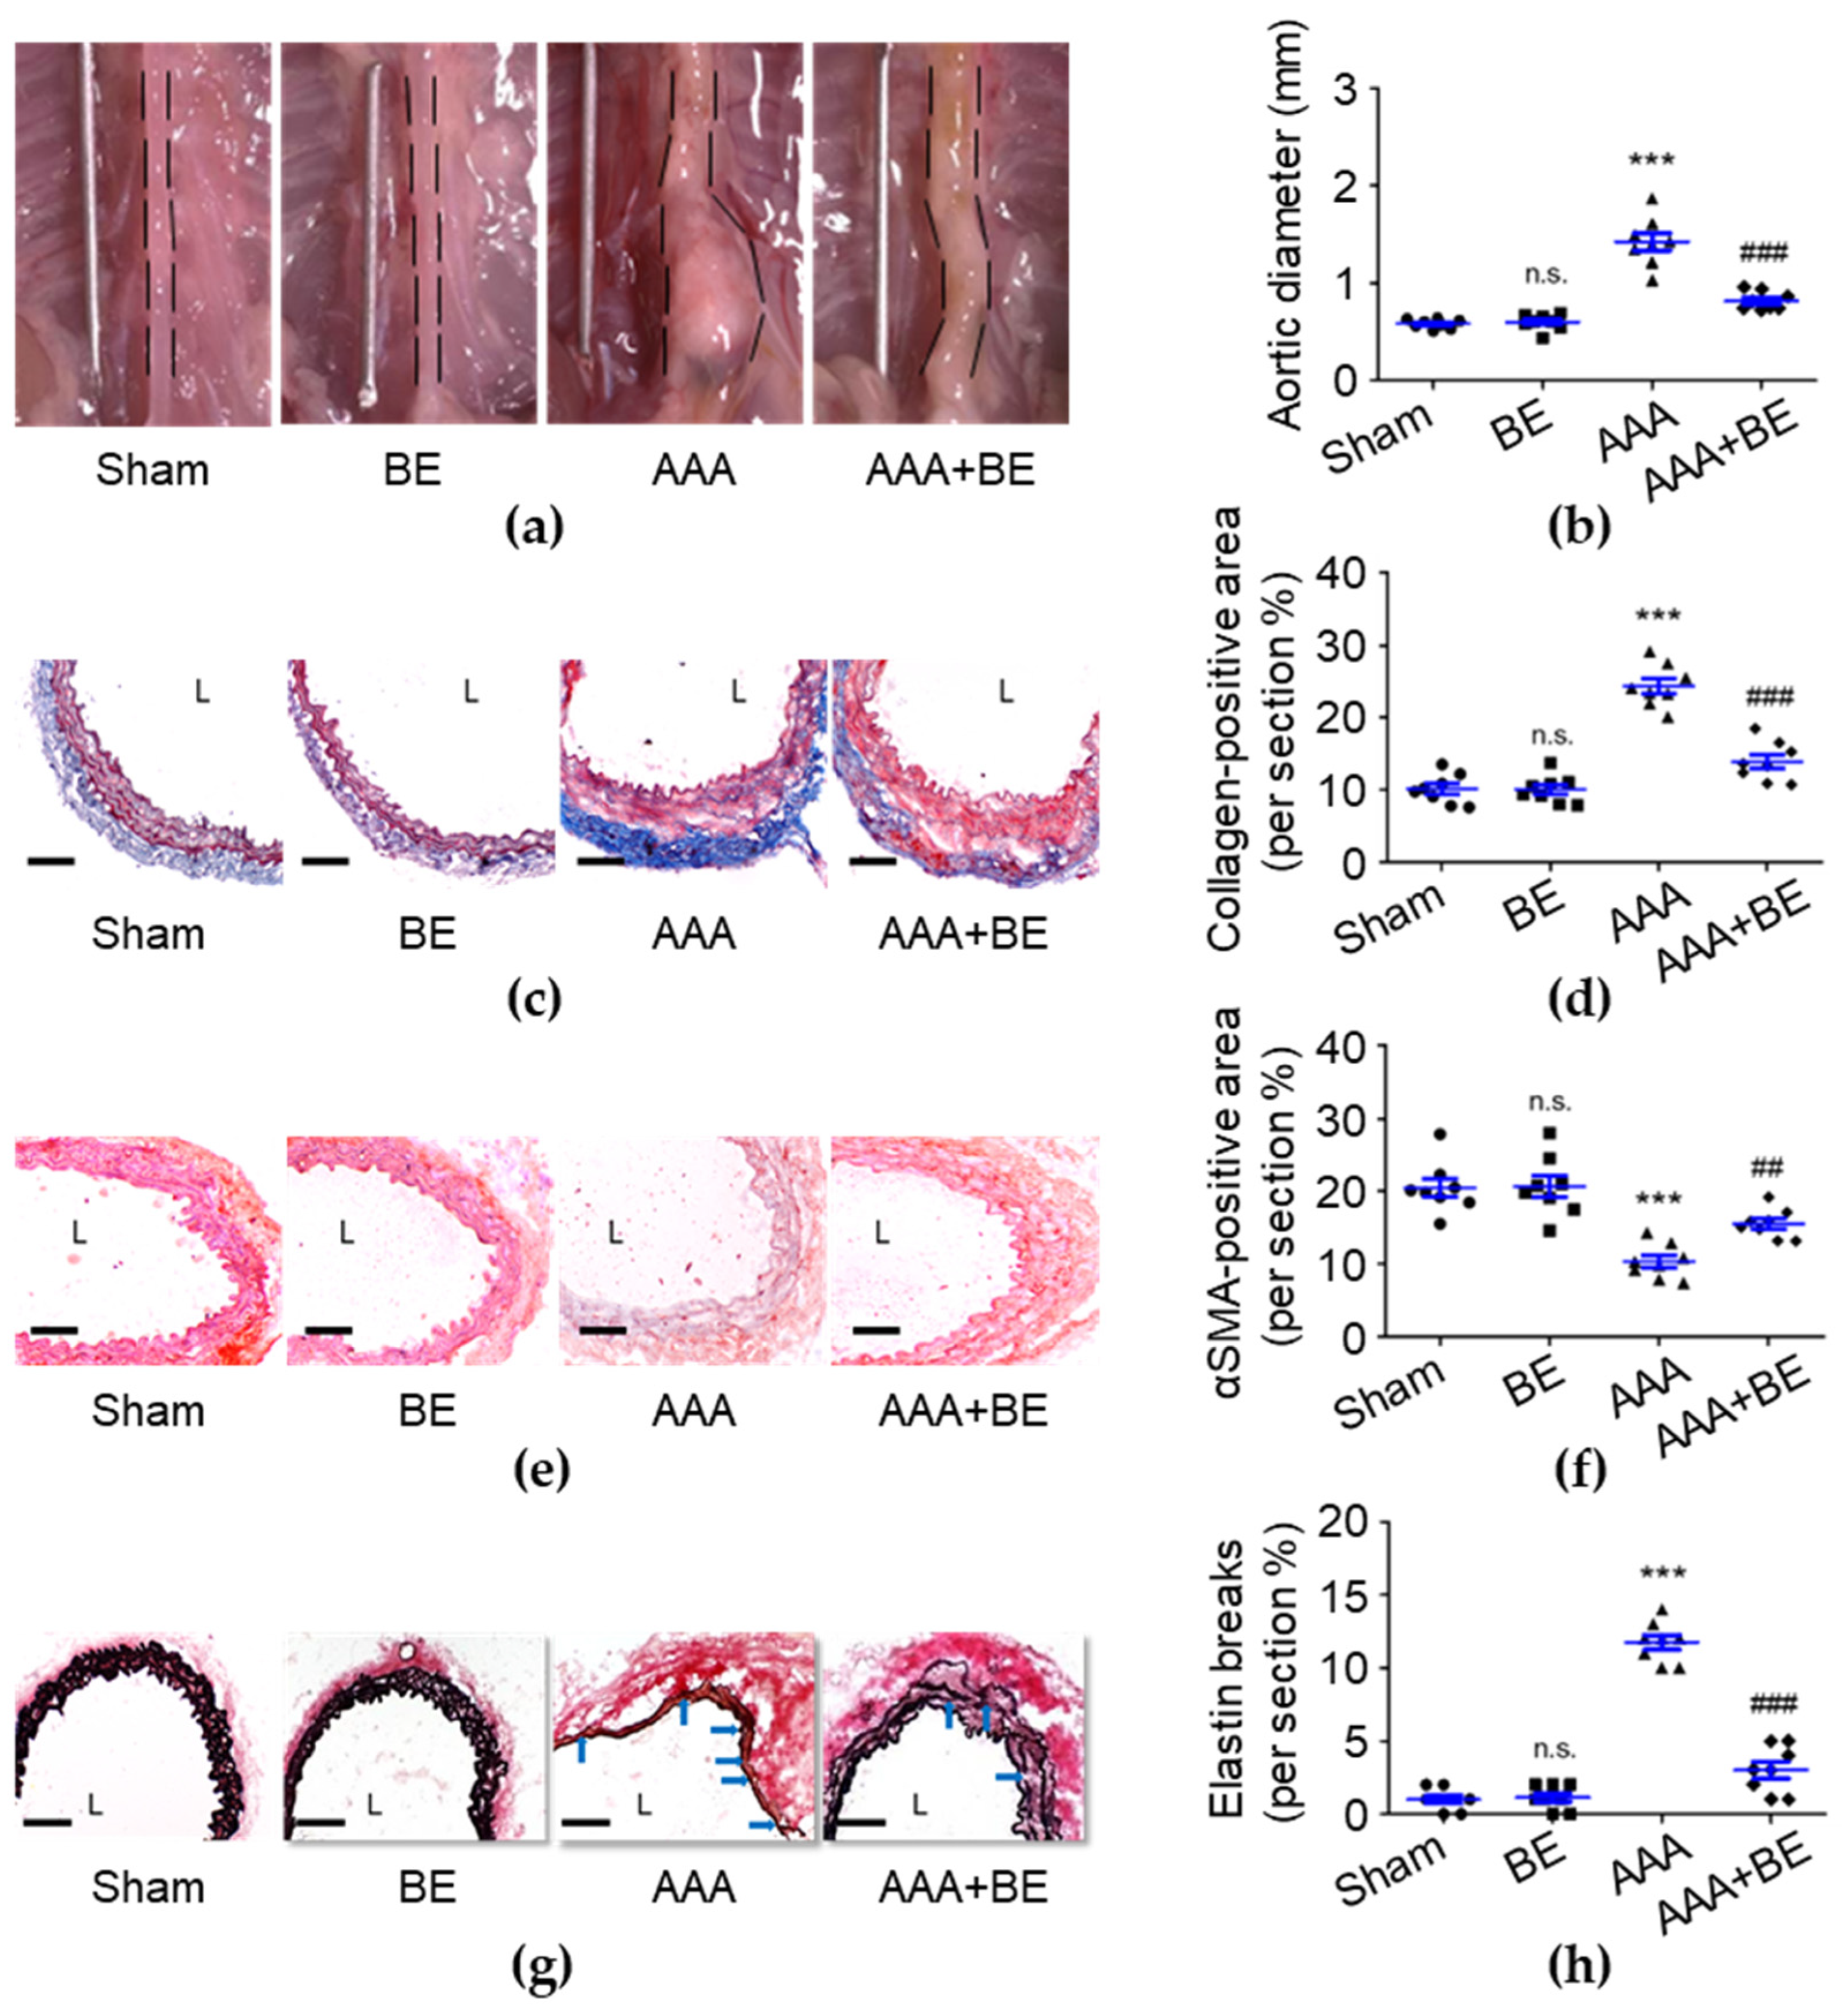 IJMS | Free Full-Text | Vasculoprotective Potential of Baicalein in  Angiotensin II-Infused Abdominal Aortic Aneurysms through Inhibiting  Inflammation and Oxidative Stress